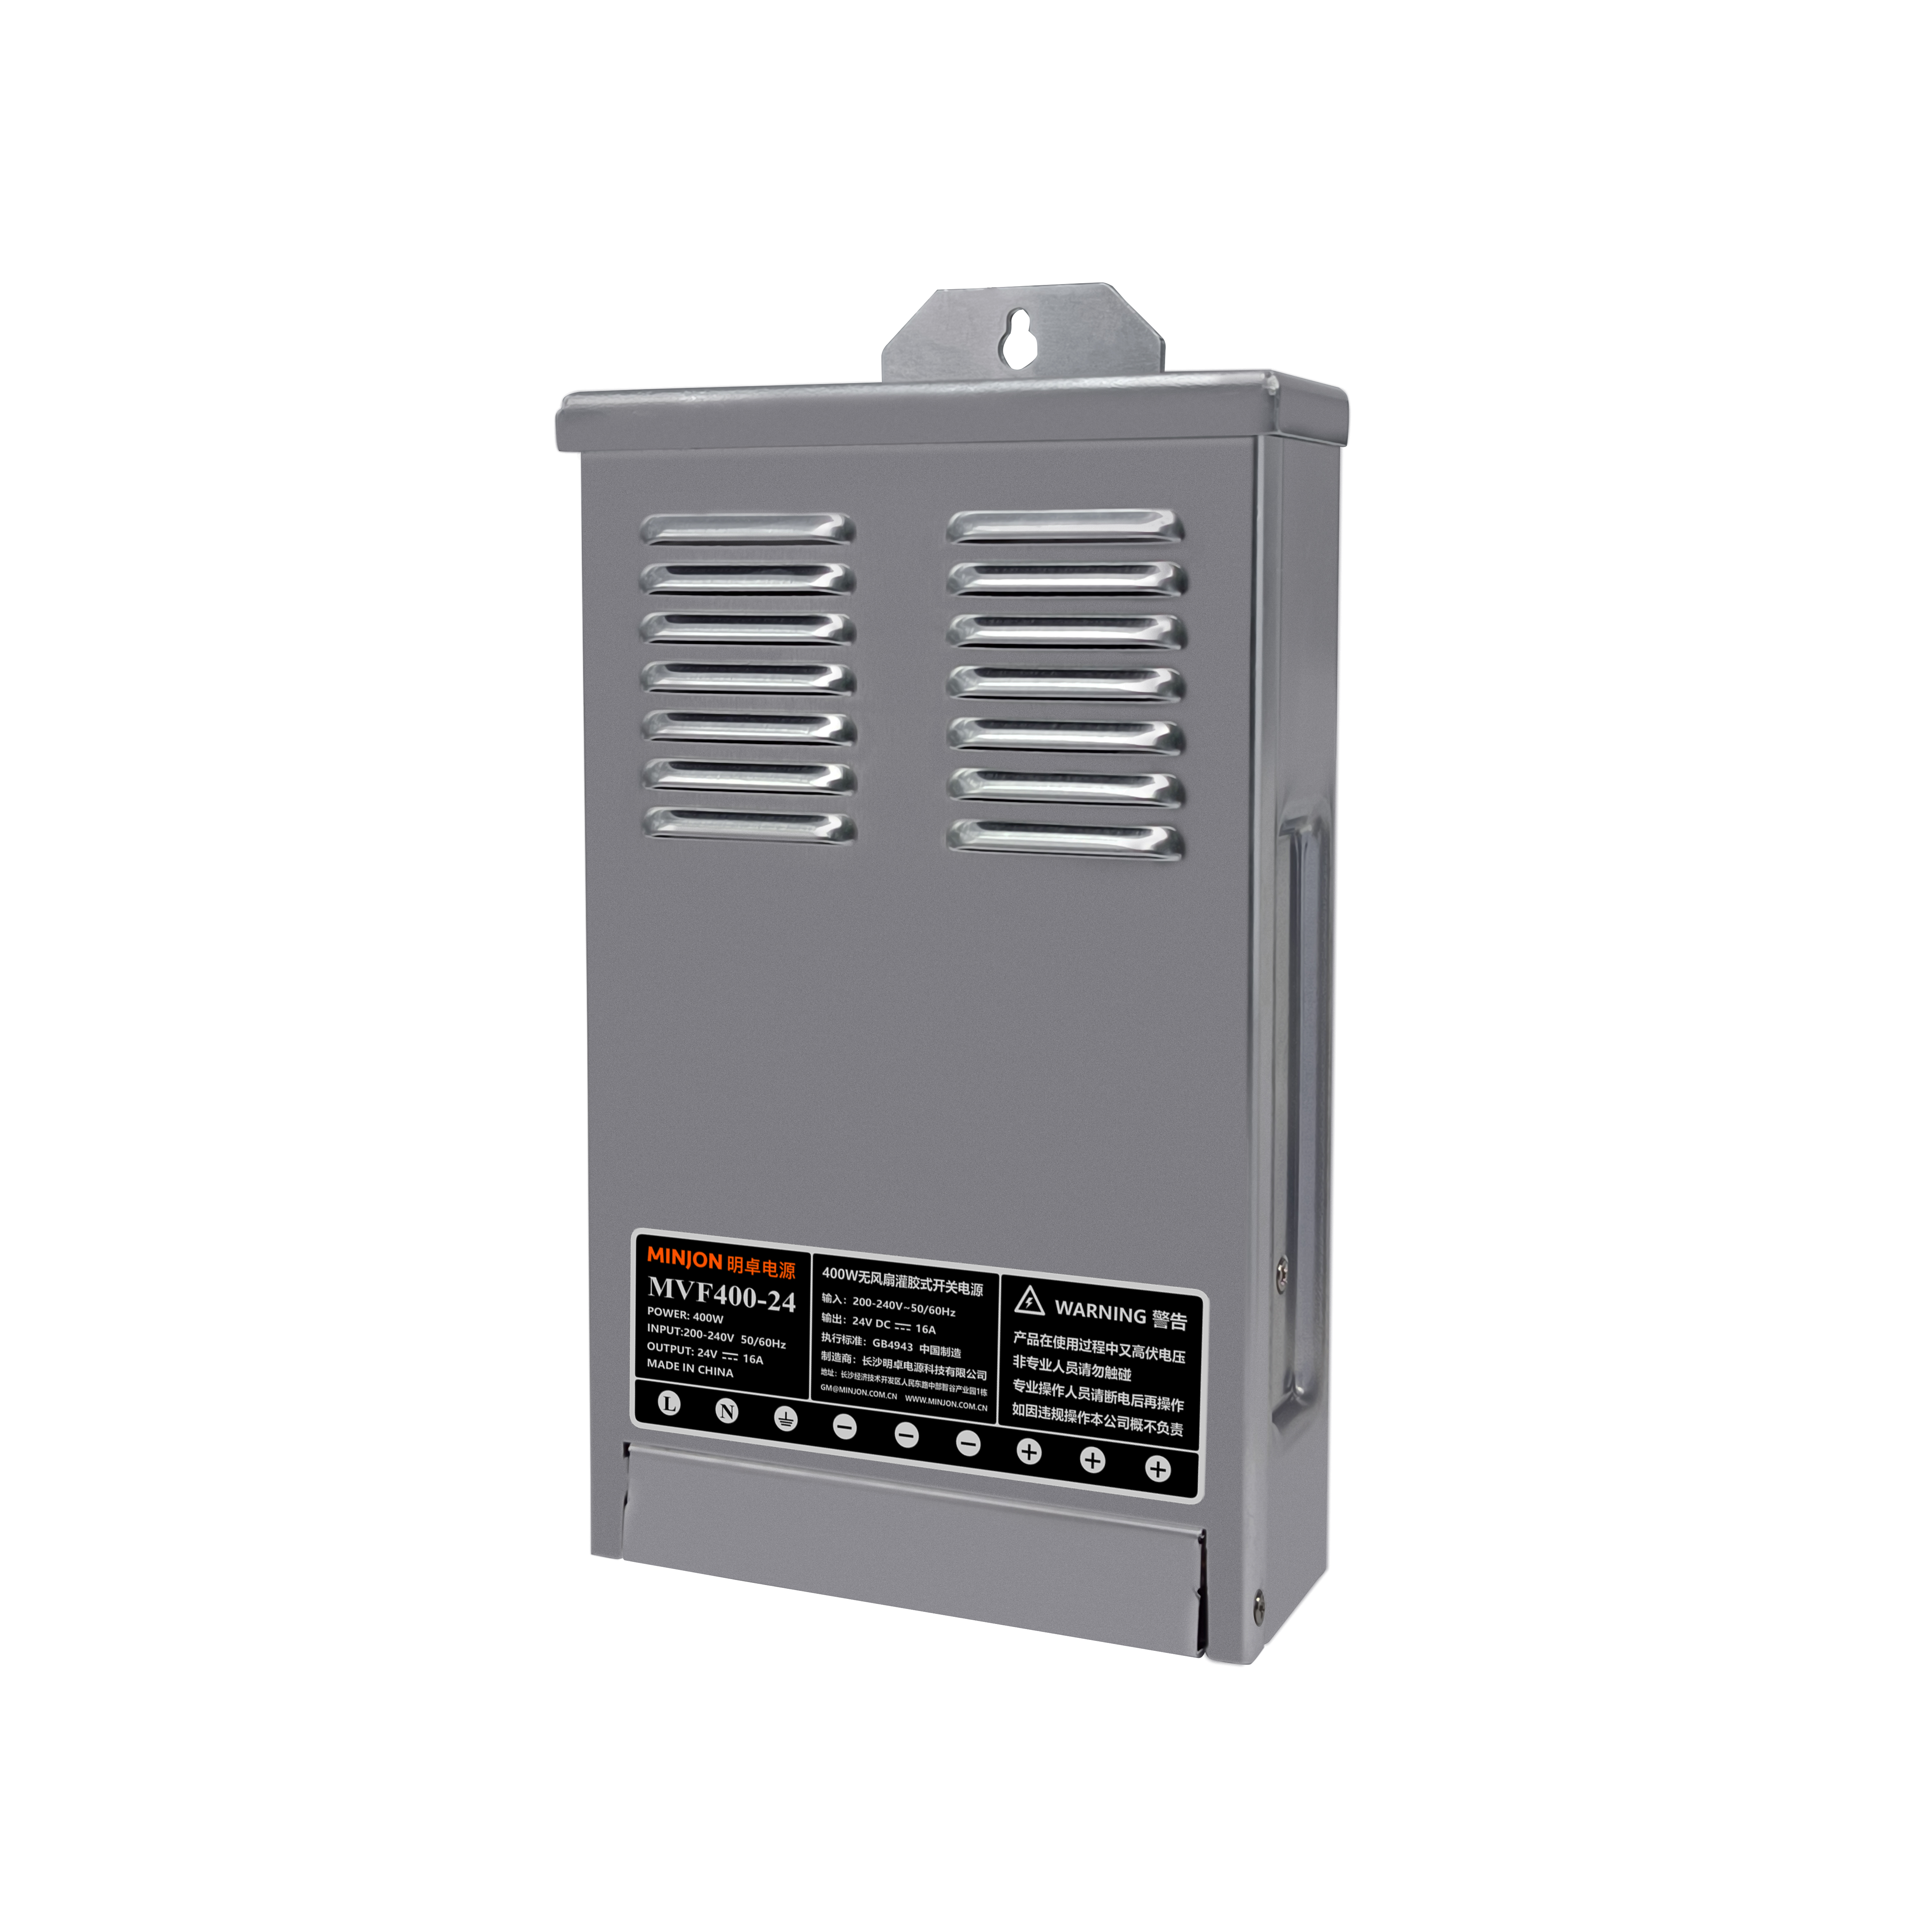 MVF400-24 Rainproof Sliver Power Supply Used Extensively